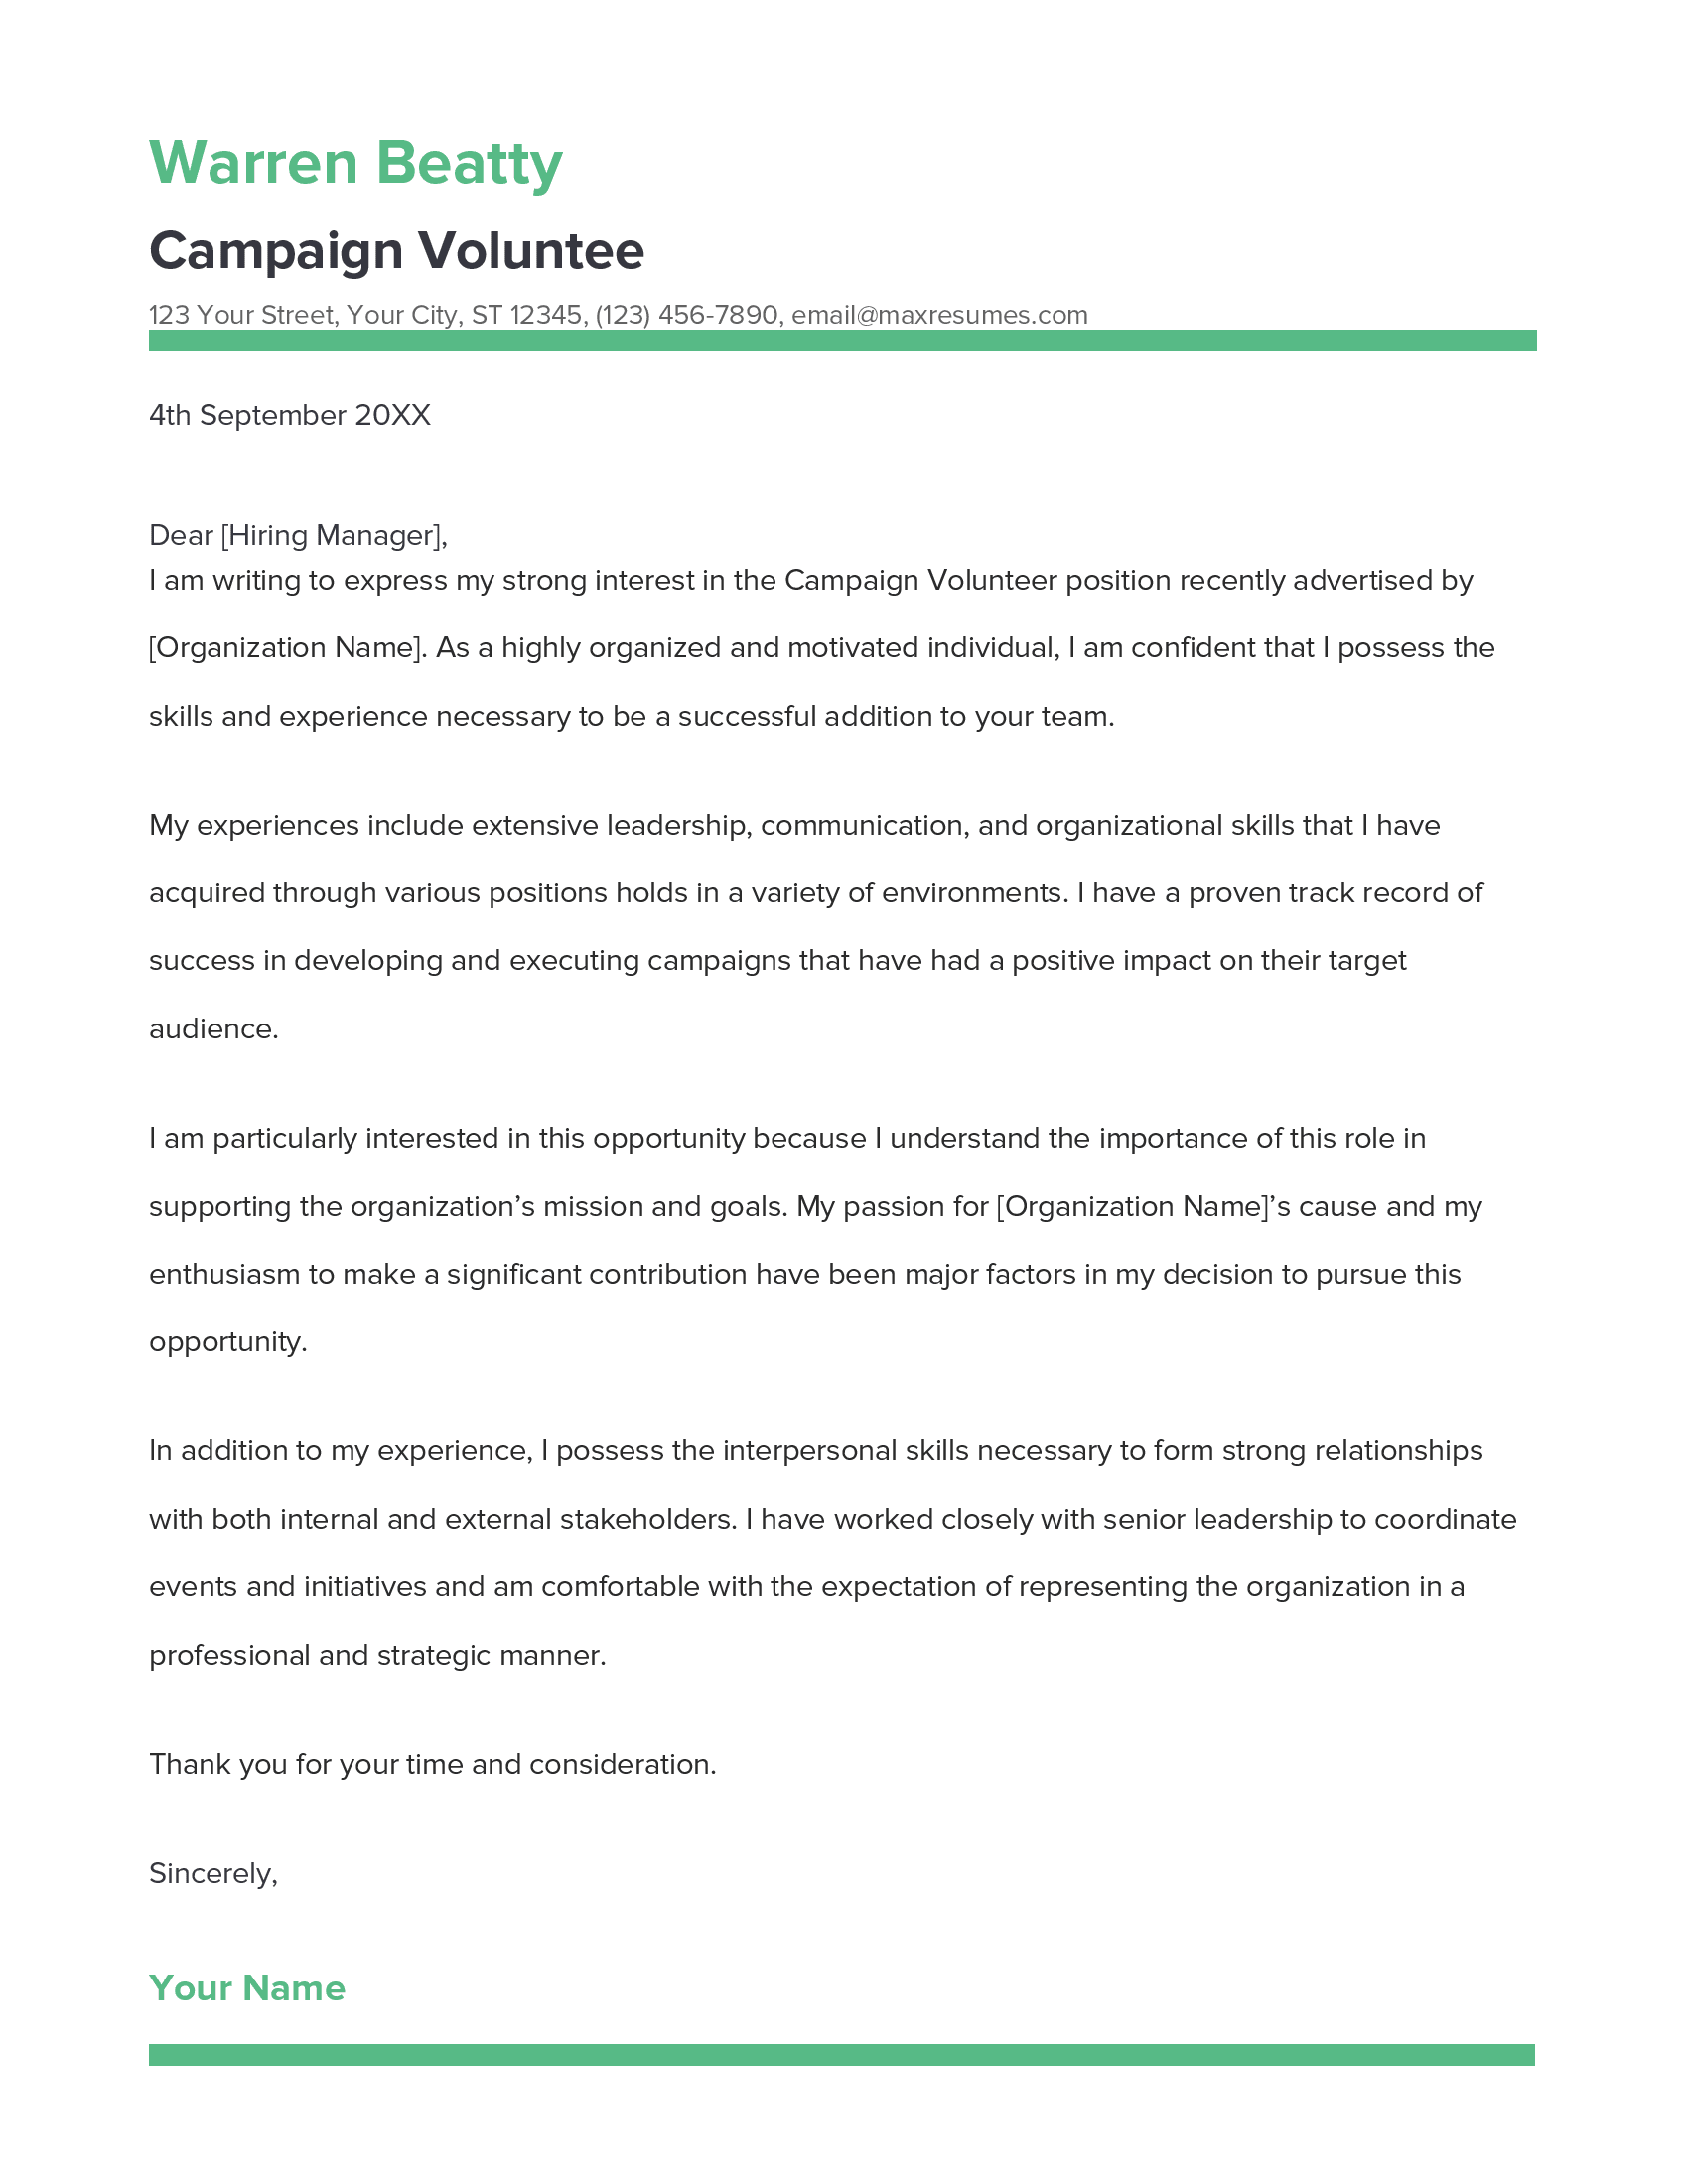 Campaign Volunteer Cover Letter Example